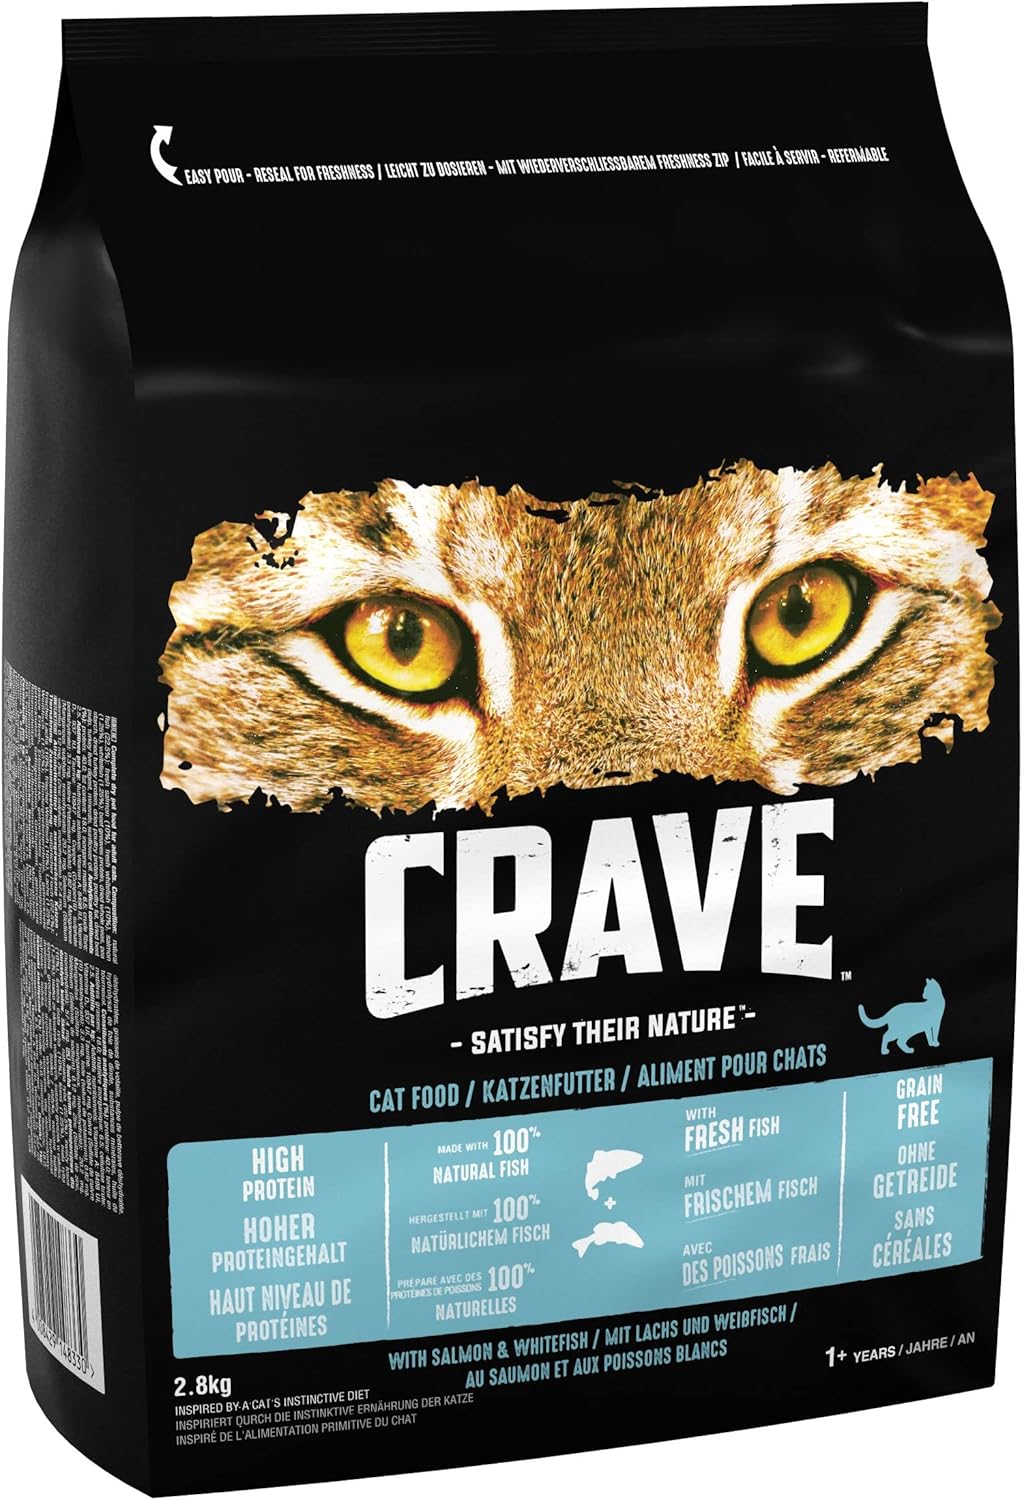 Crave Dry Cat Food - High Protein and Grain-Free Cat Food with Salmon and WhiteFish, 2, 8 kg (Pack of 3)?Case436114